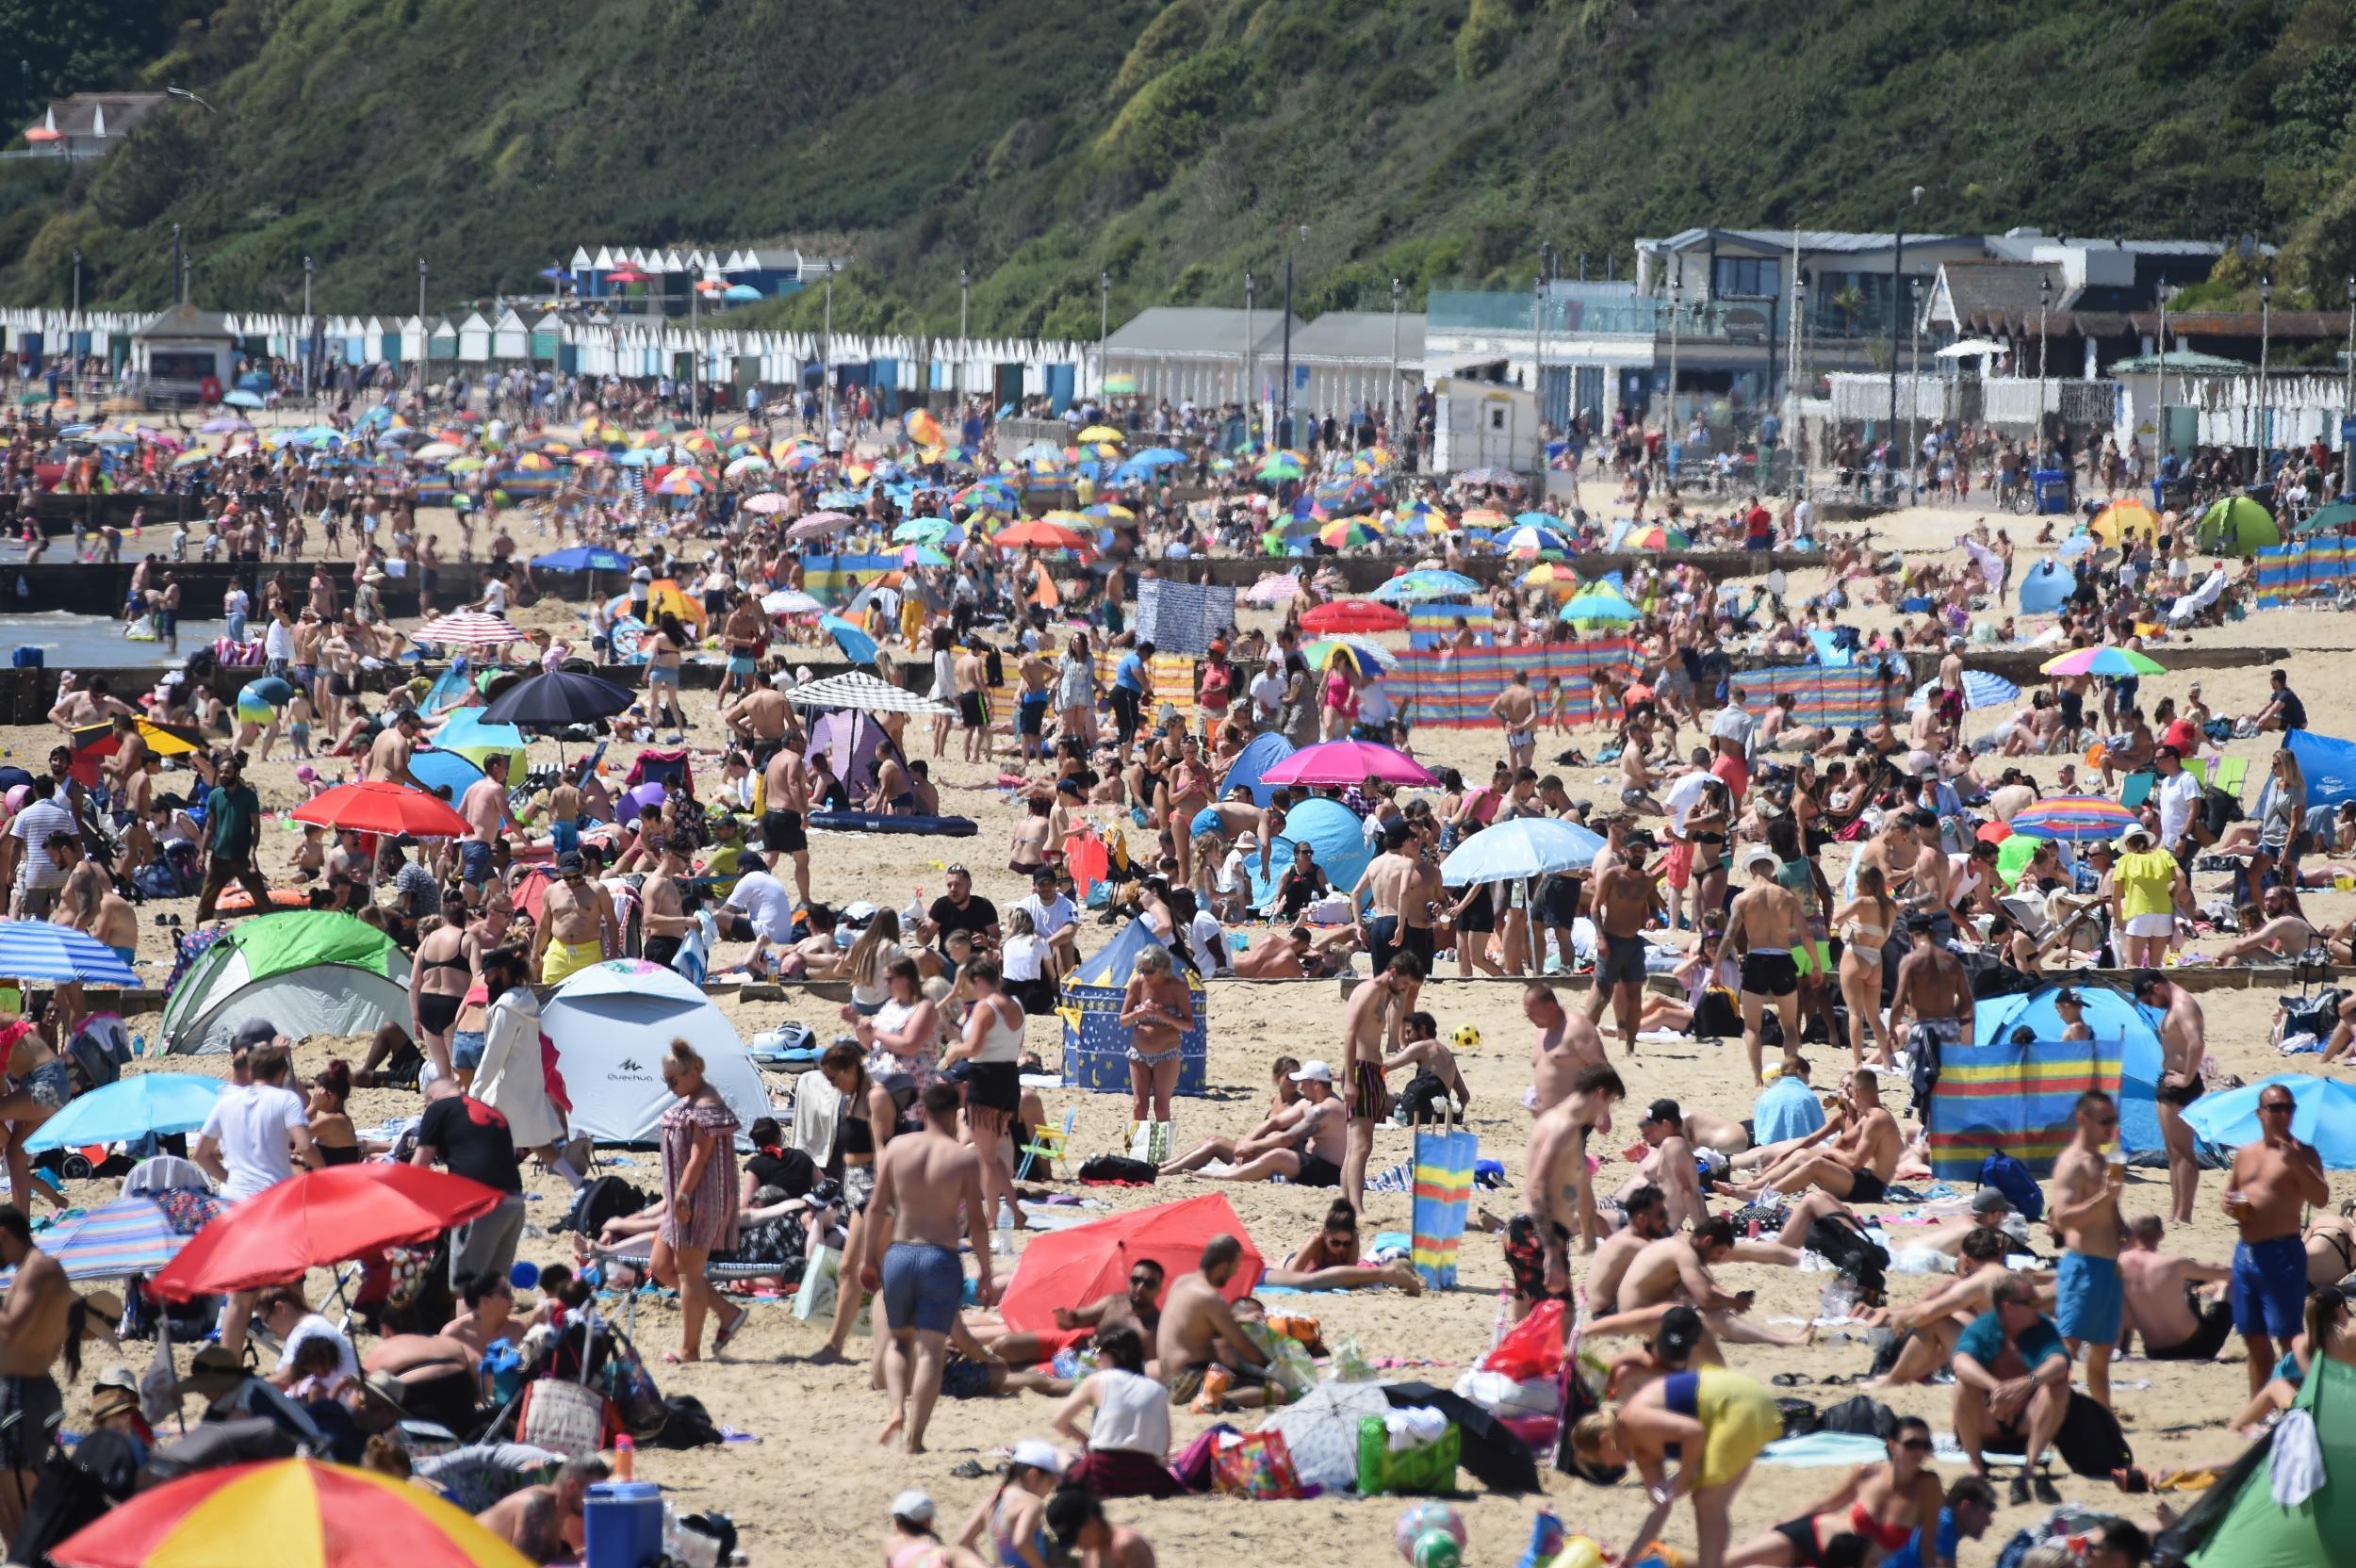 People enjoy the hot weather at Bournemouth beach during the UK's spring bank holiday on May 25, 2020 in Bournemouth (Getty)